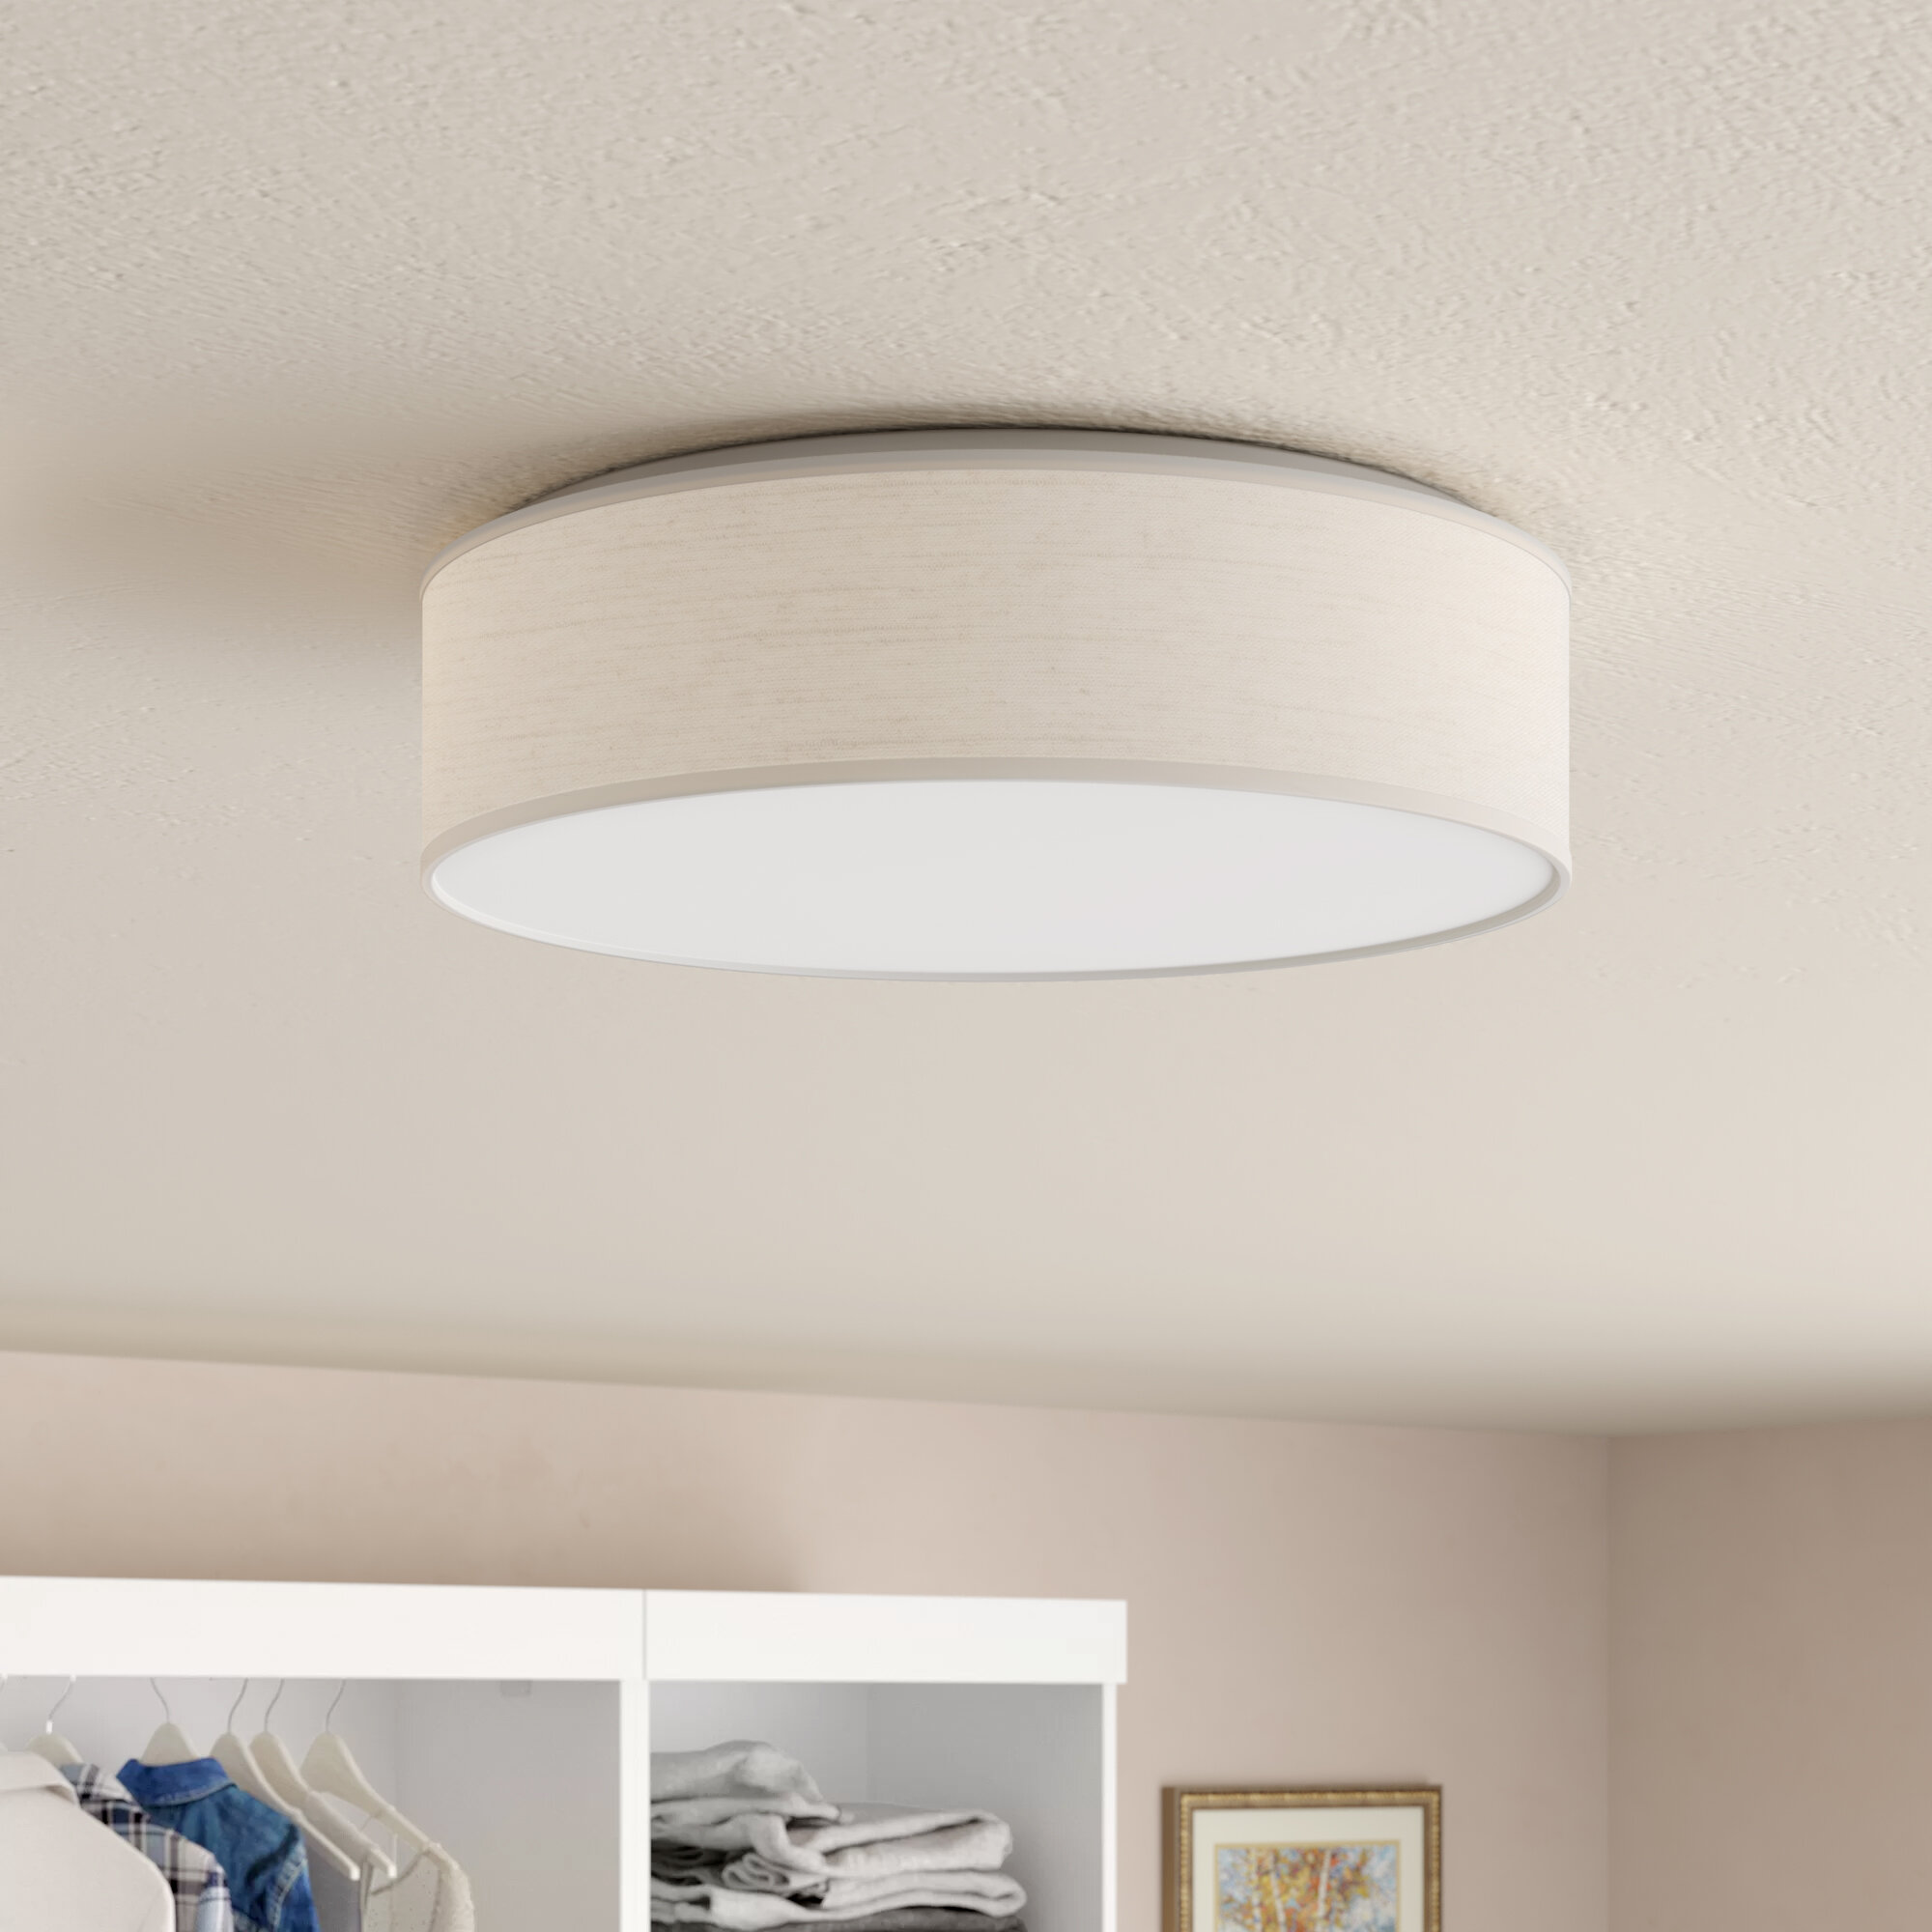 Lighting Replacement Ceiling Light Fixture Flush Mount Multi Type Lamp Cover 